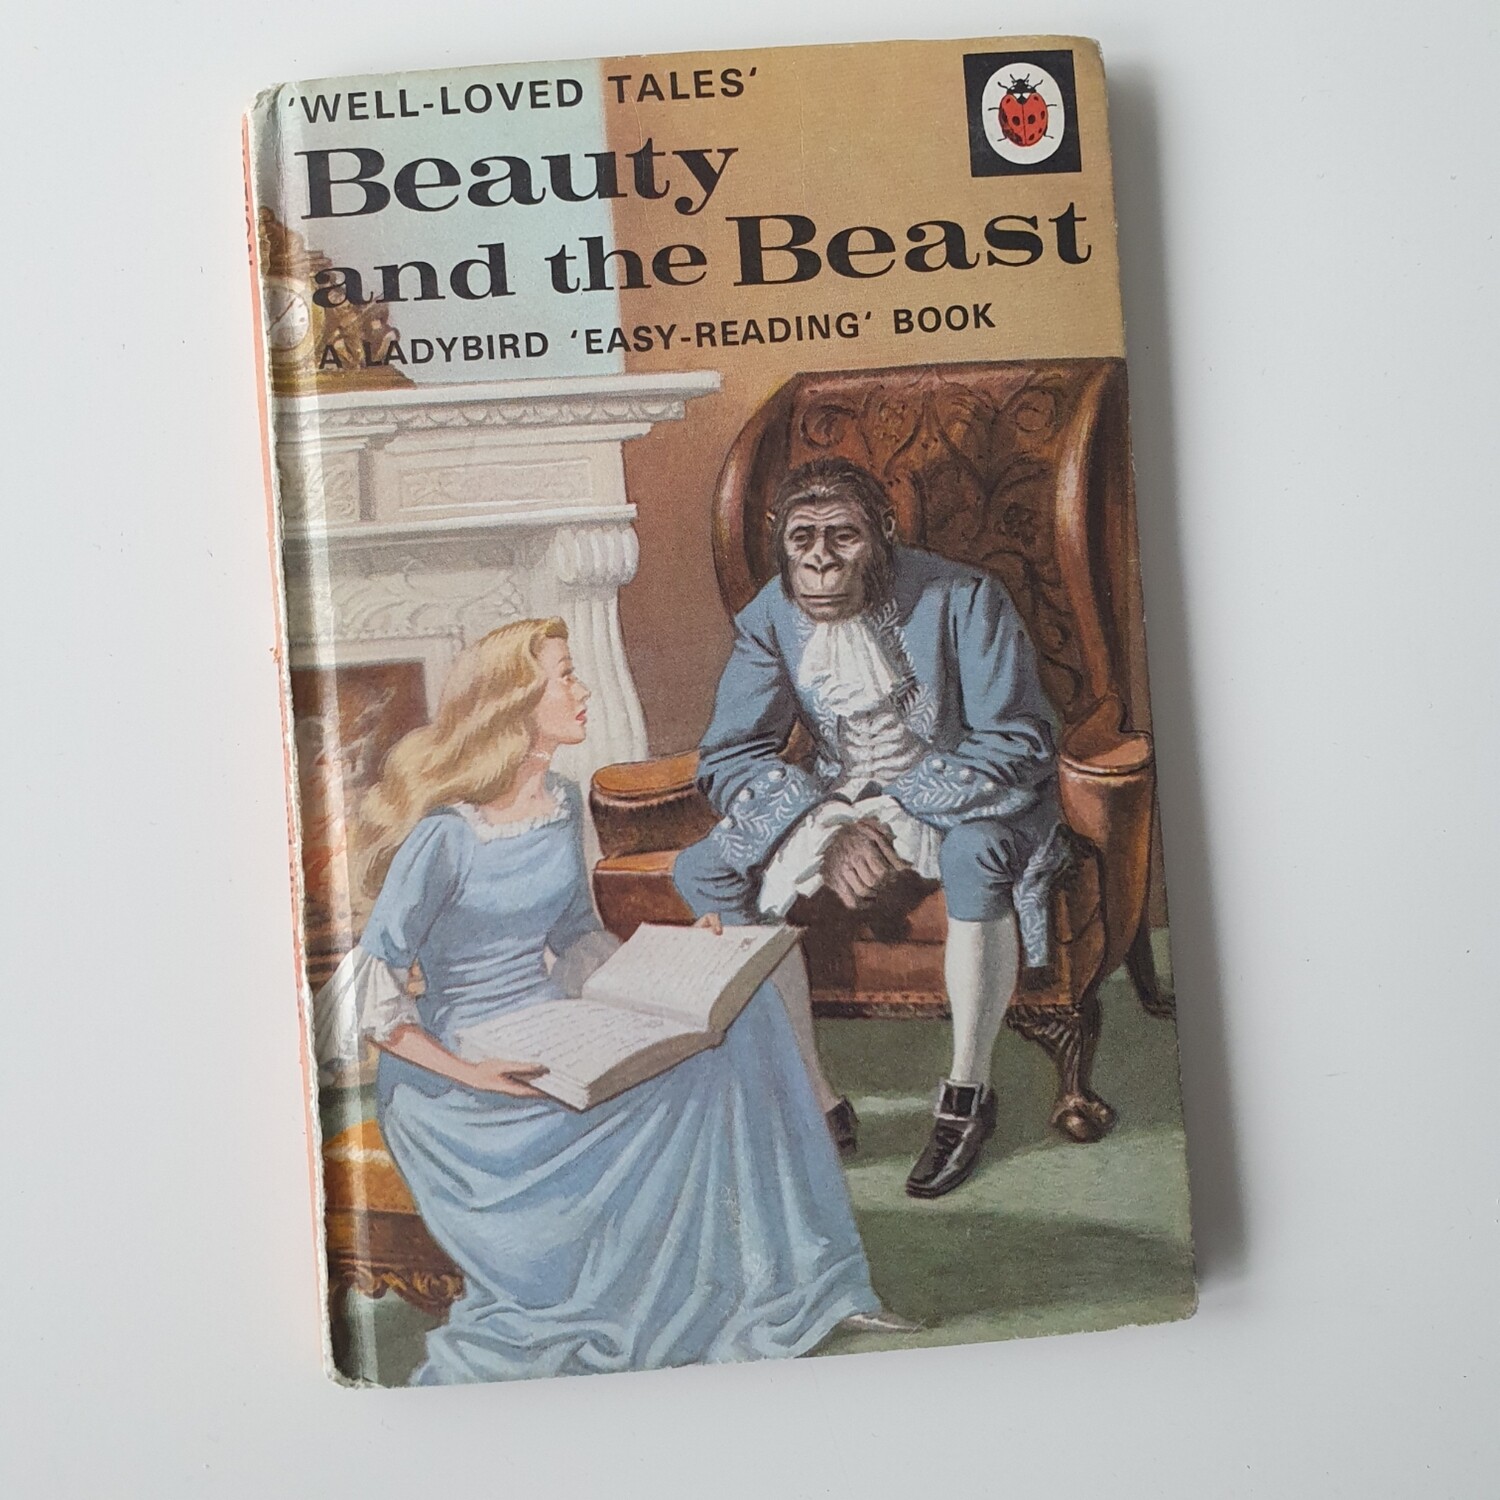 Beauty and the Beast Notebook - Ladybird book - well loved tales